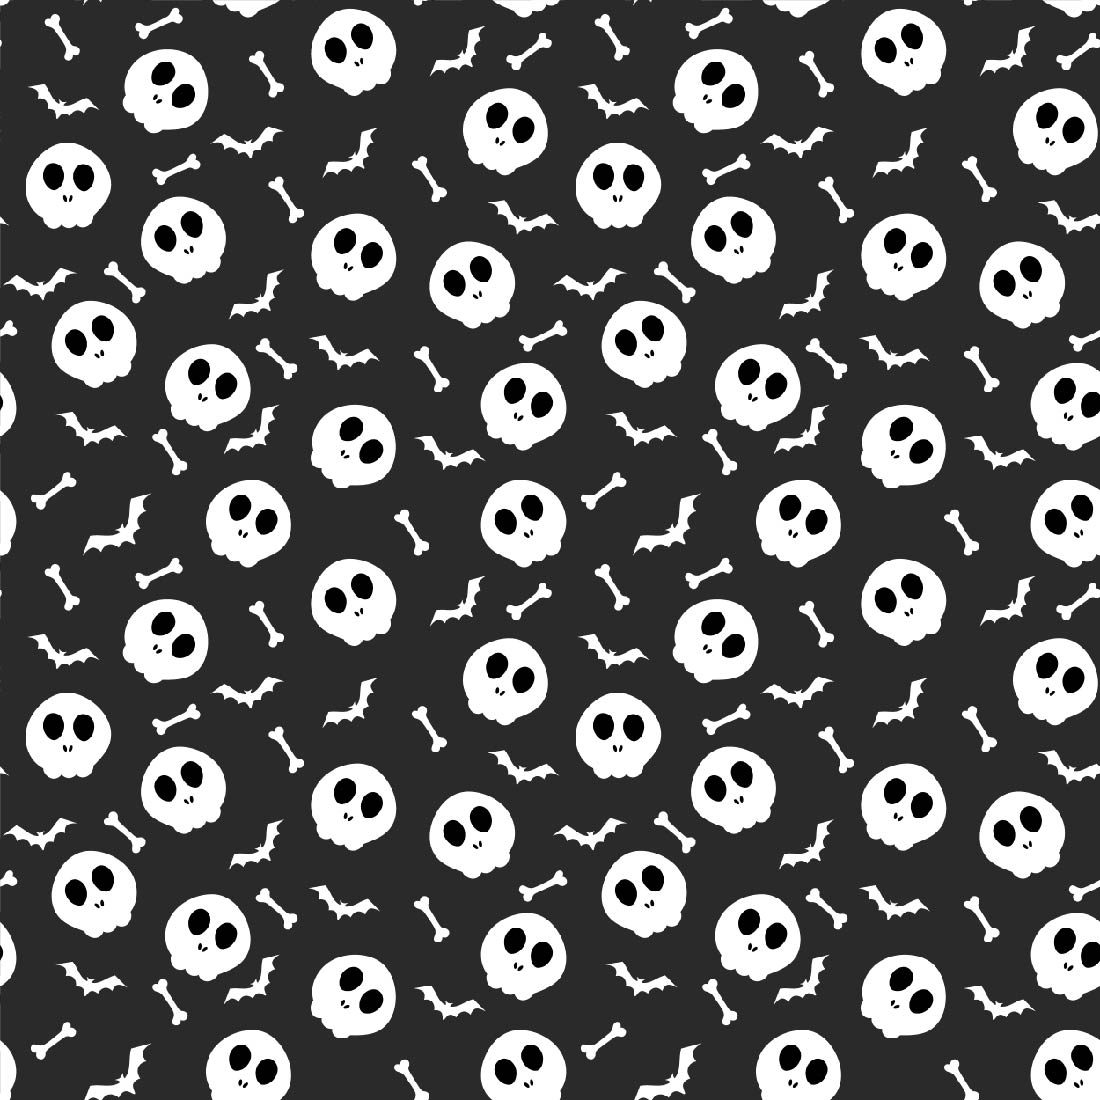 Scary Halloween Ghost Pumpkins and Skulls Vector Seamless Patterns